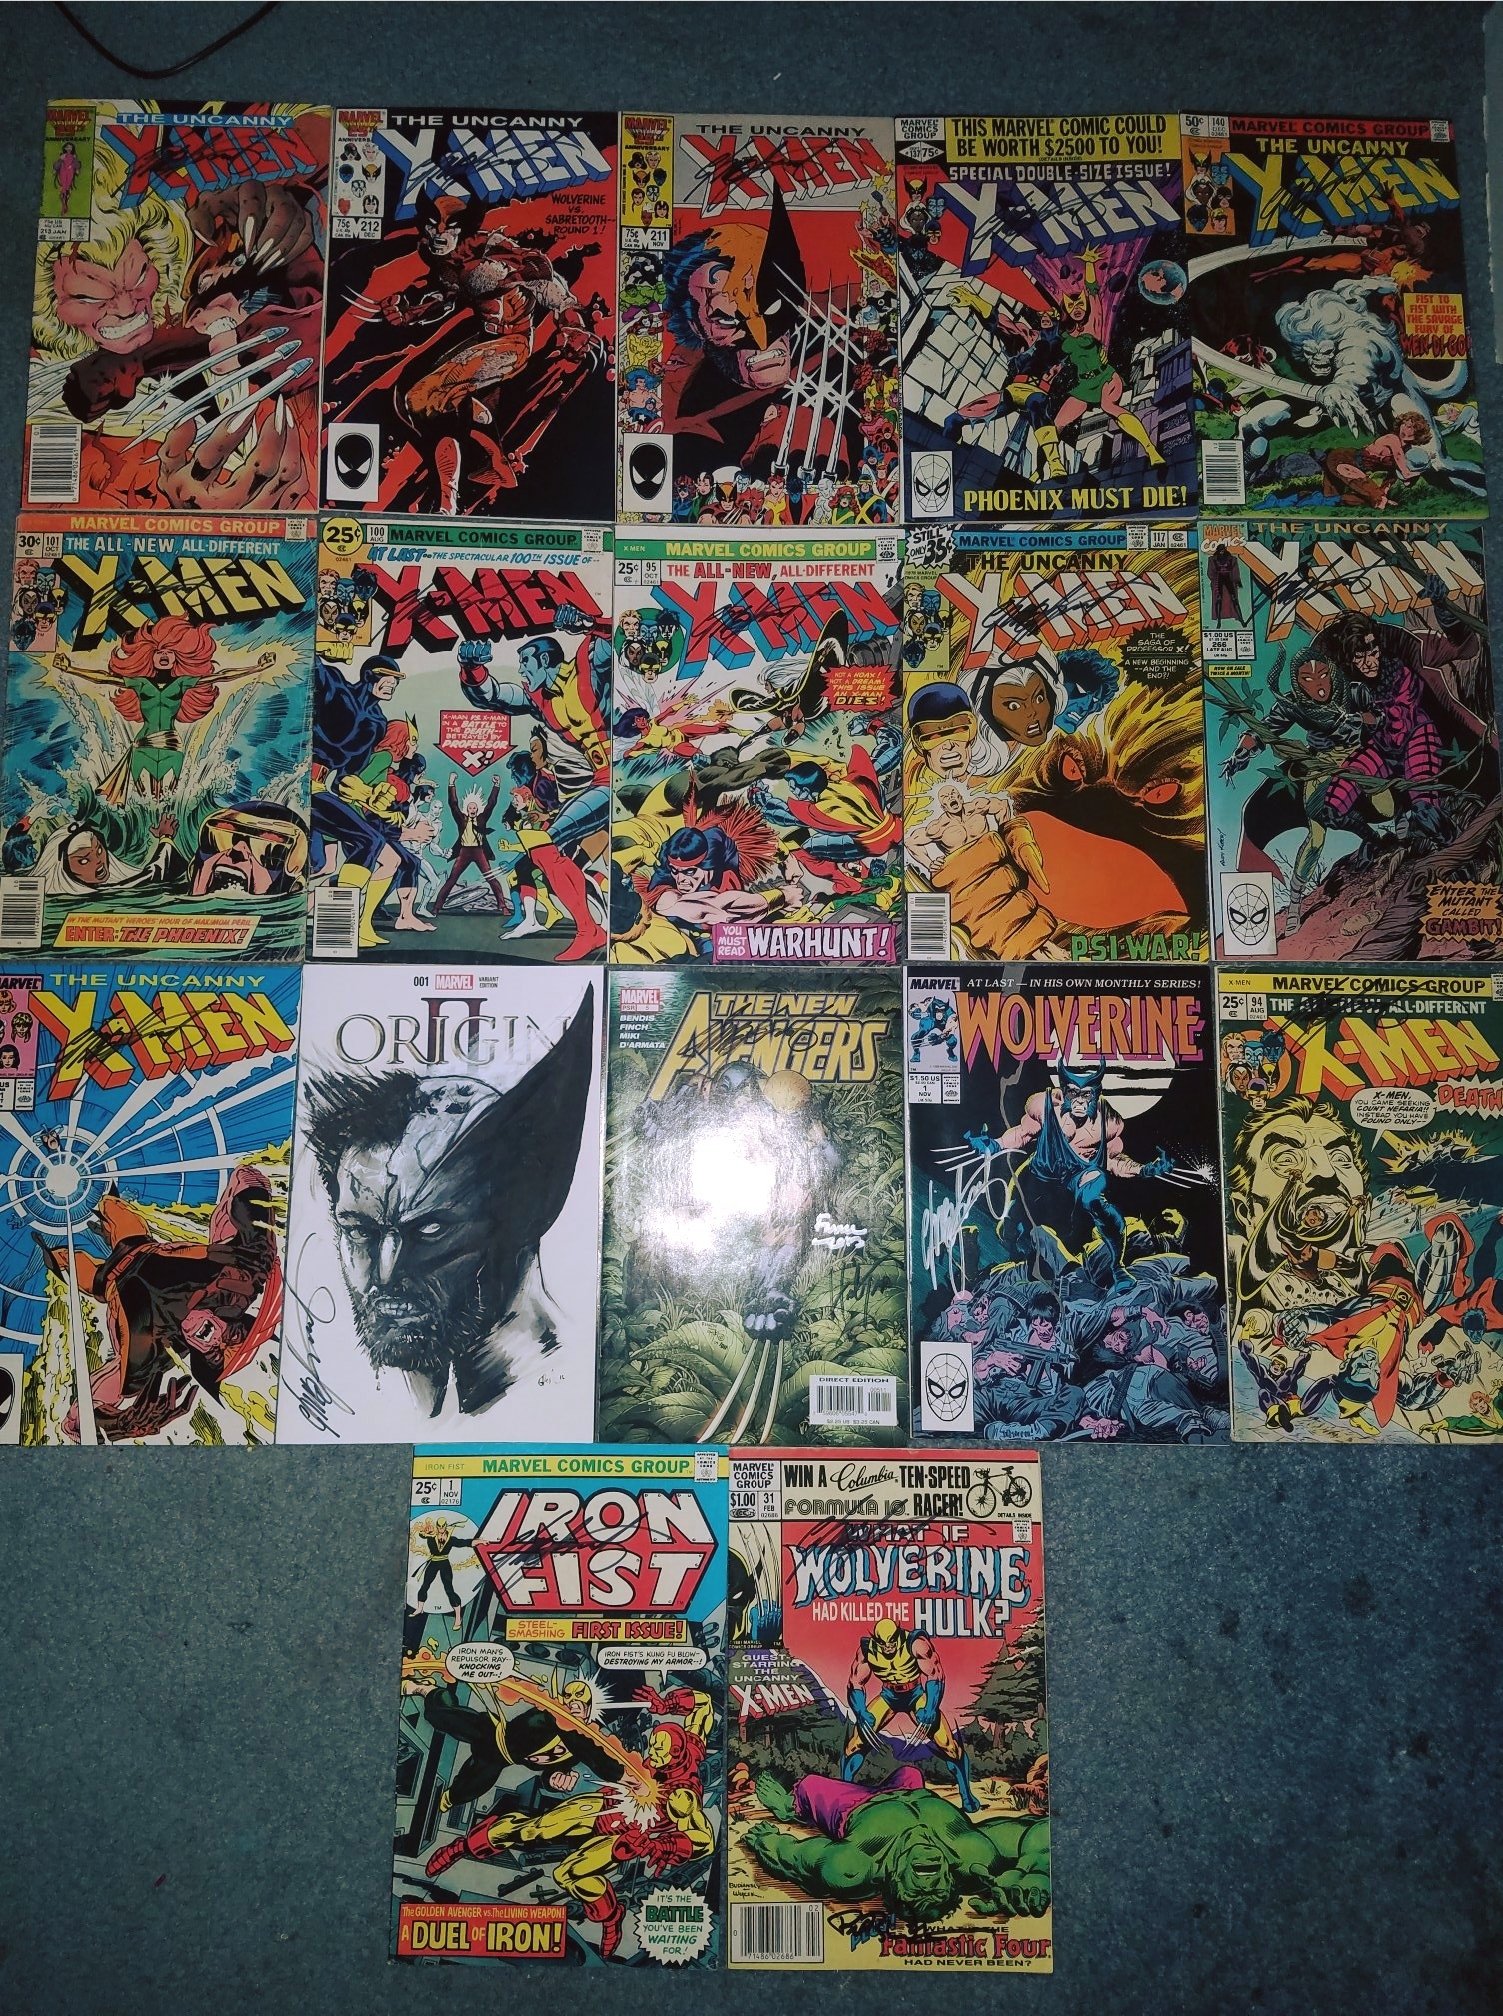 Happy birthday to Chris Claremont! I\m kind of a fan  